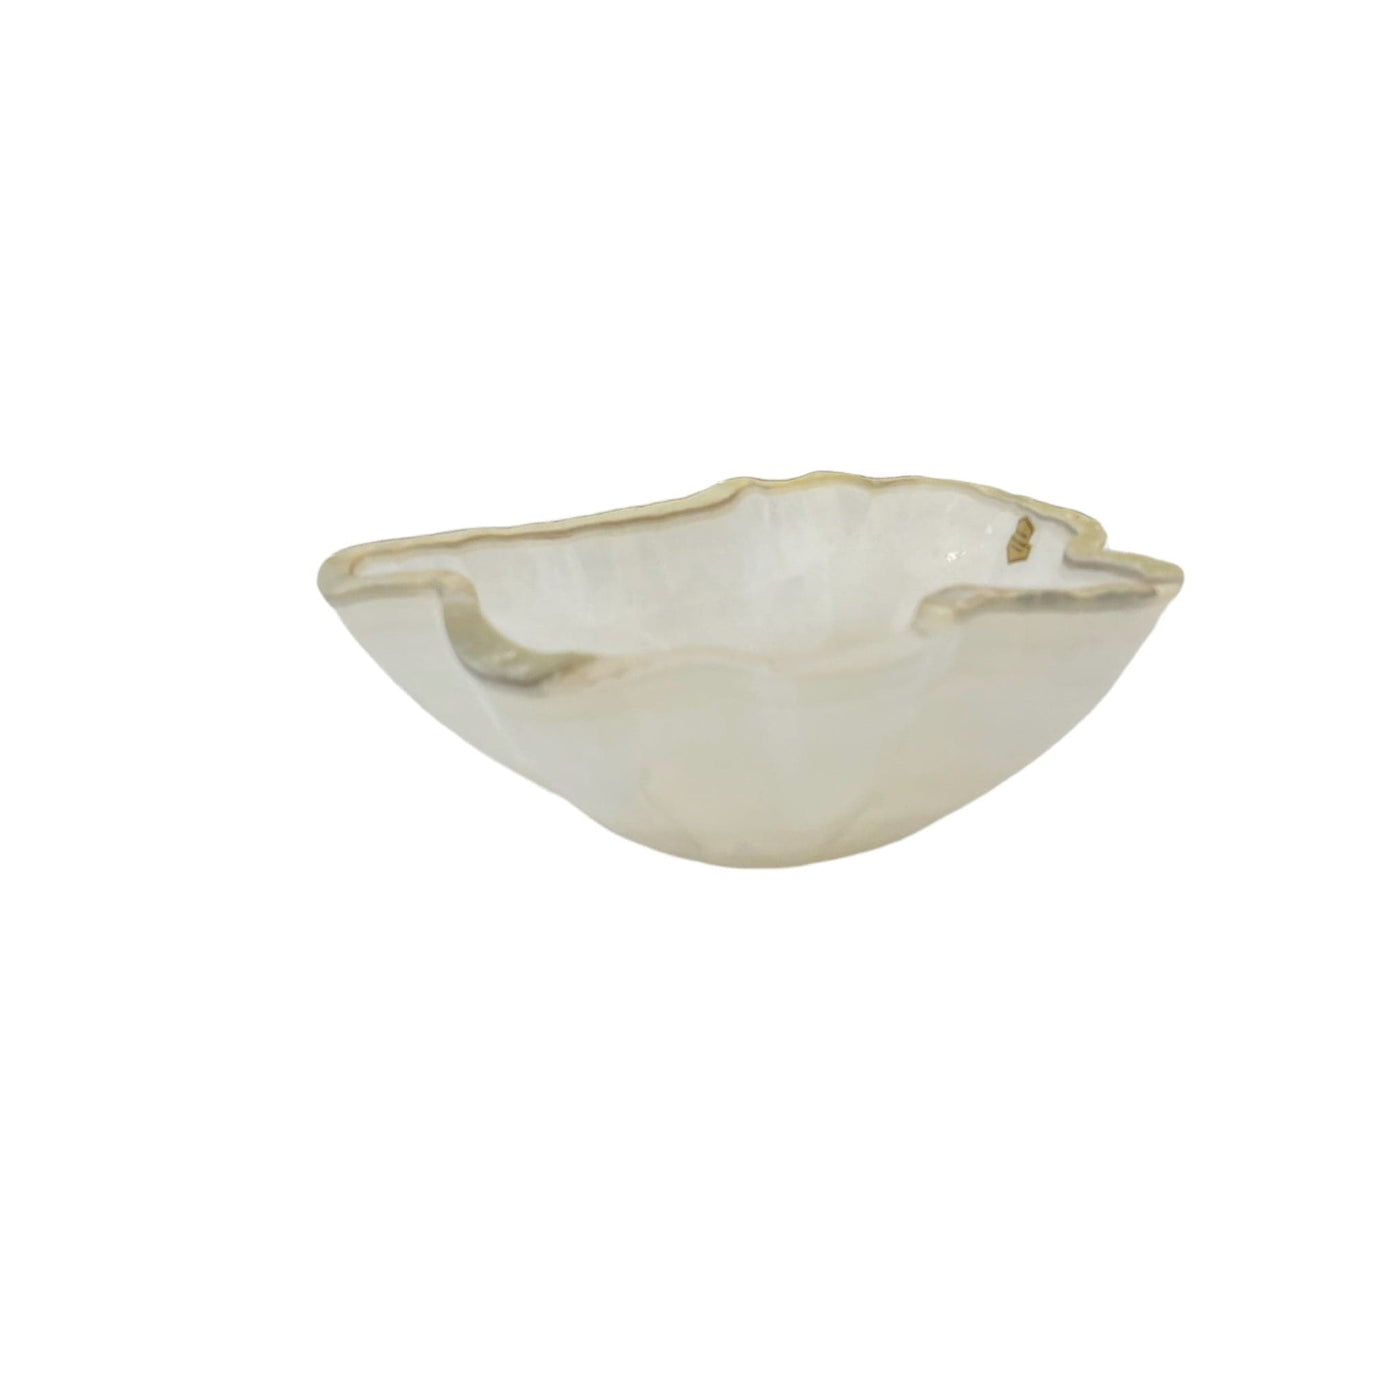 Light colored Mexican onyx bowl on a white background.